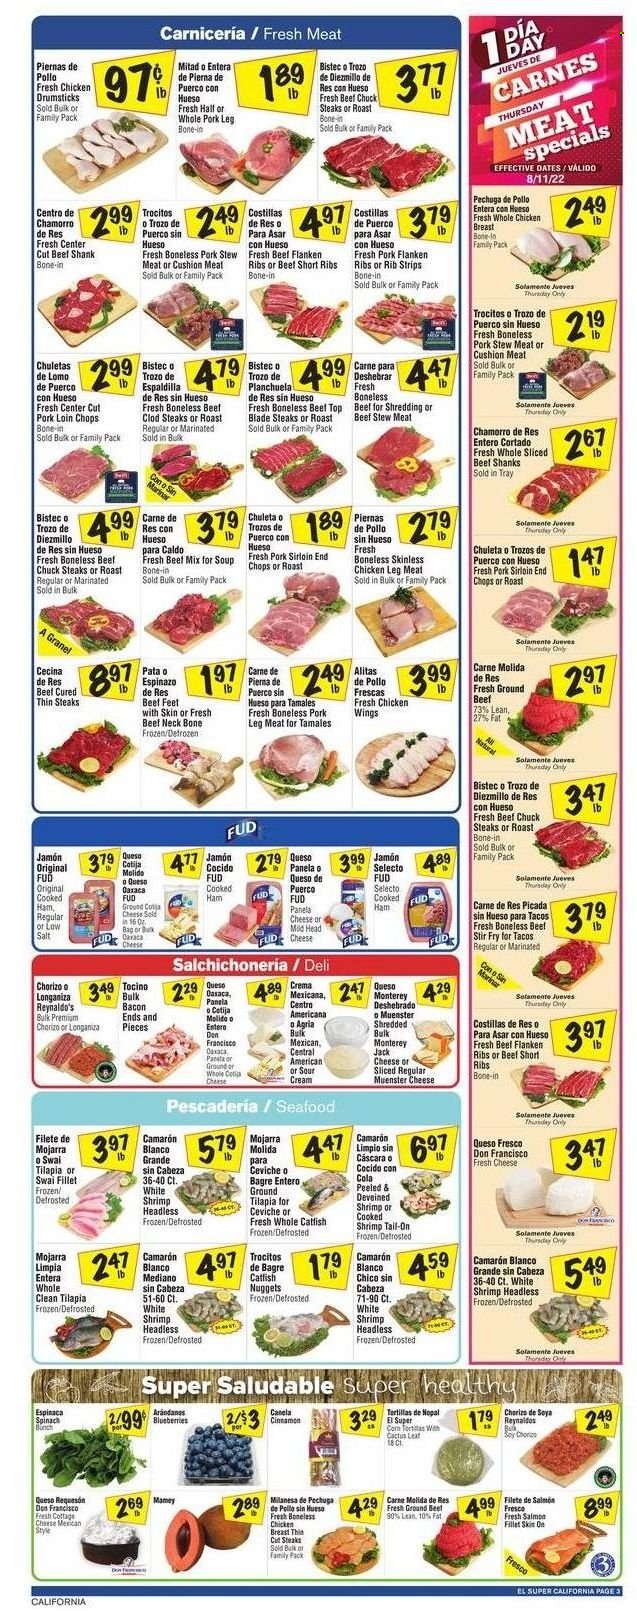 thumbnail - El Super Flyer - 08/10/2022 - 08/16/2022 - Sales products - stew meat, tortillas, spinach, blueberries, catfish, salmon, salmon fillet, tilapia, seafood, shrimps, swai fillet, soup, nuggets, bacon, cooked ham, ham, chorizo, cottage cheese, Monterey Jack cheese, queso fresco, Münster cheese, Panela cheese, sour cream, chicken wings, strips, cinnamon, whole chicken, chicken breasts, chicken legs, chicken drumsticks, beef meat, beef ribs, beef shank, ground beef, steak, top blade, pork chops, pork loin, pork meat, pork leg. Page 3.